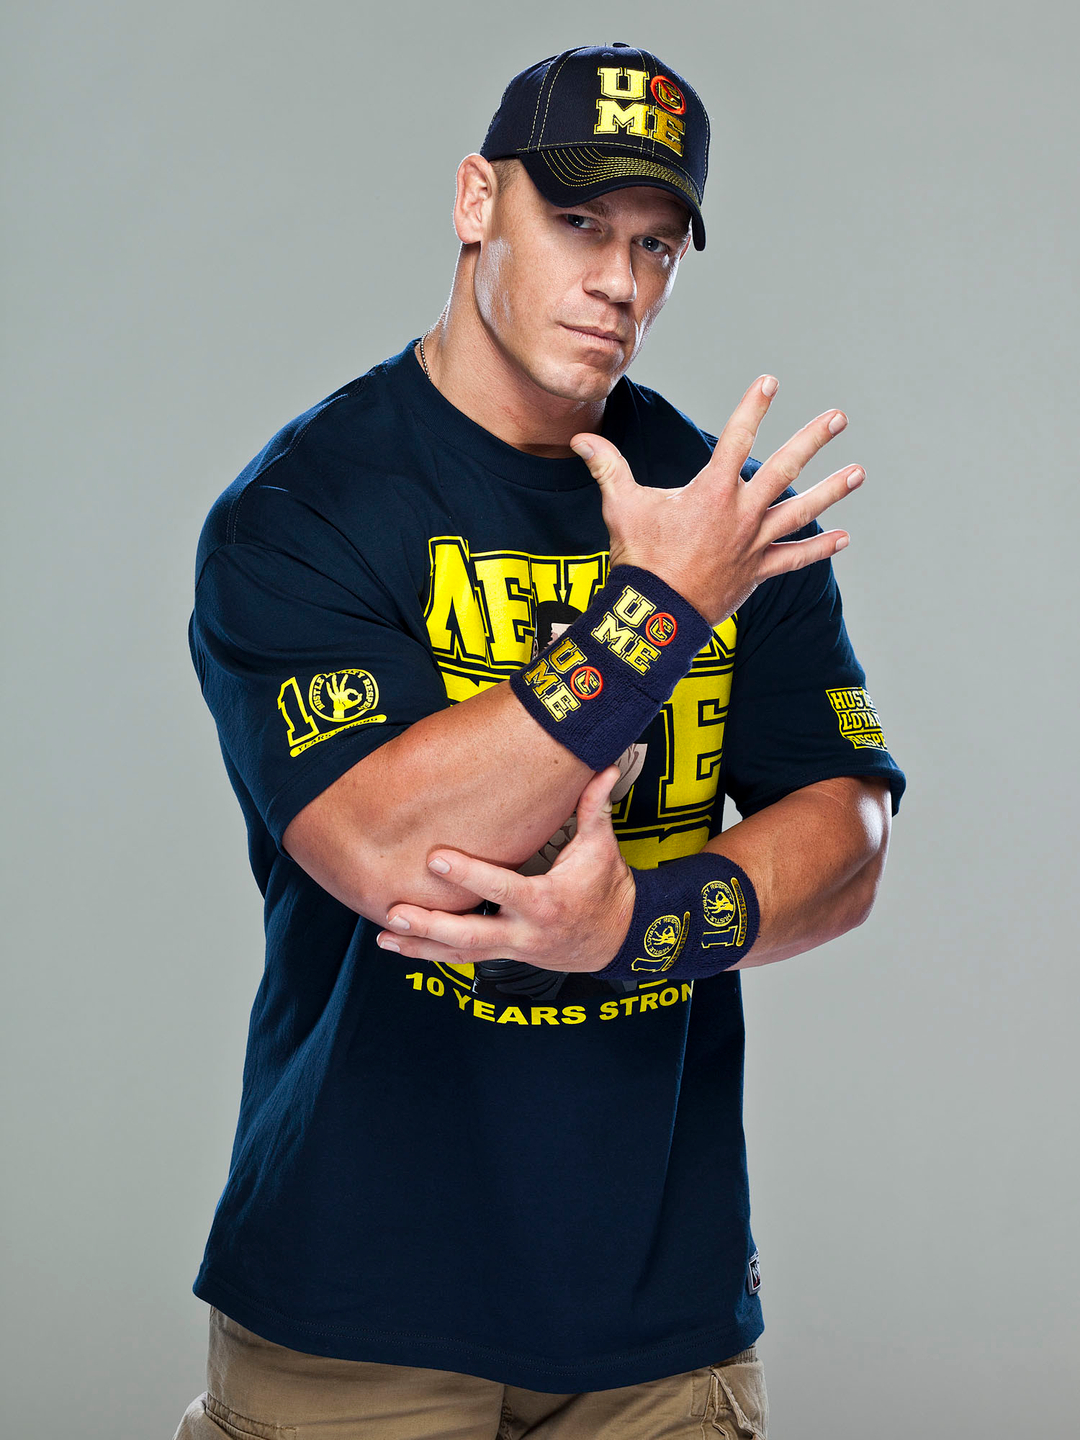 John Cena who is his mother